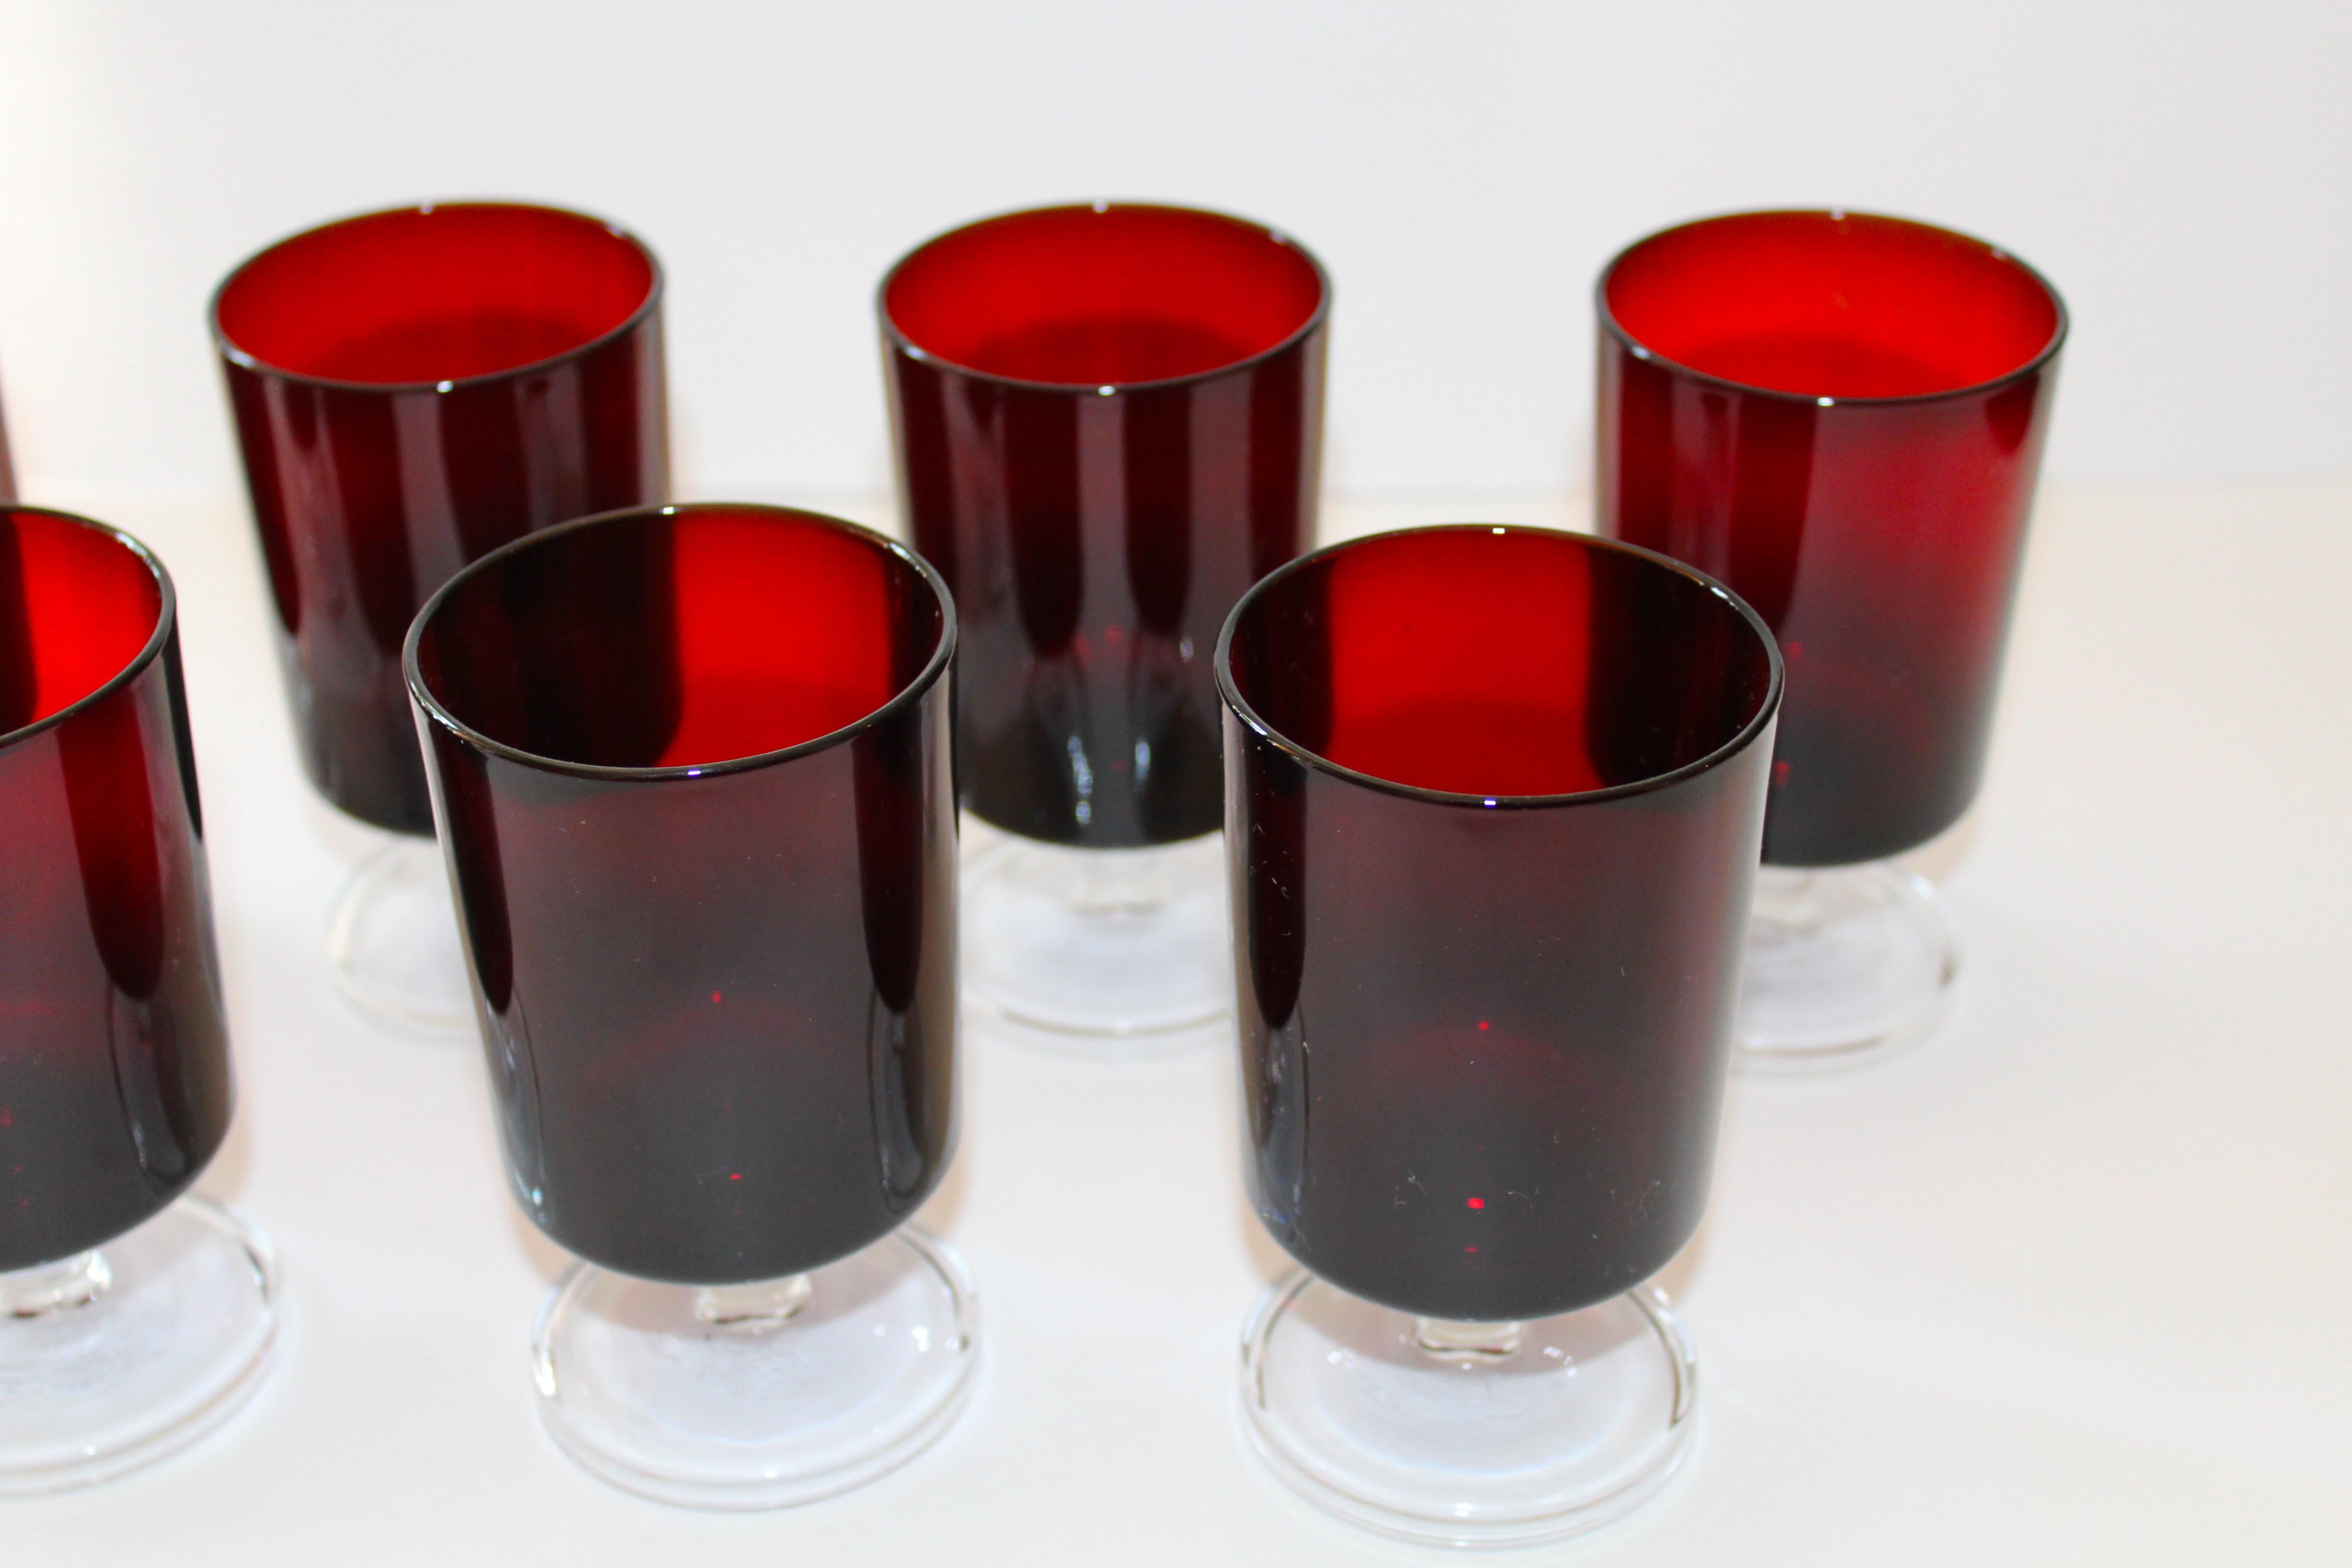 Mid-20th Century French Vintage Stemware Glasses in Ruby Red, Set of Eight, c. 1960s